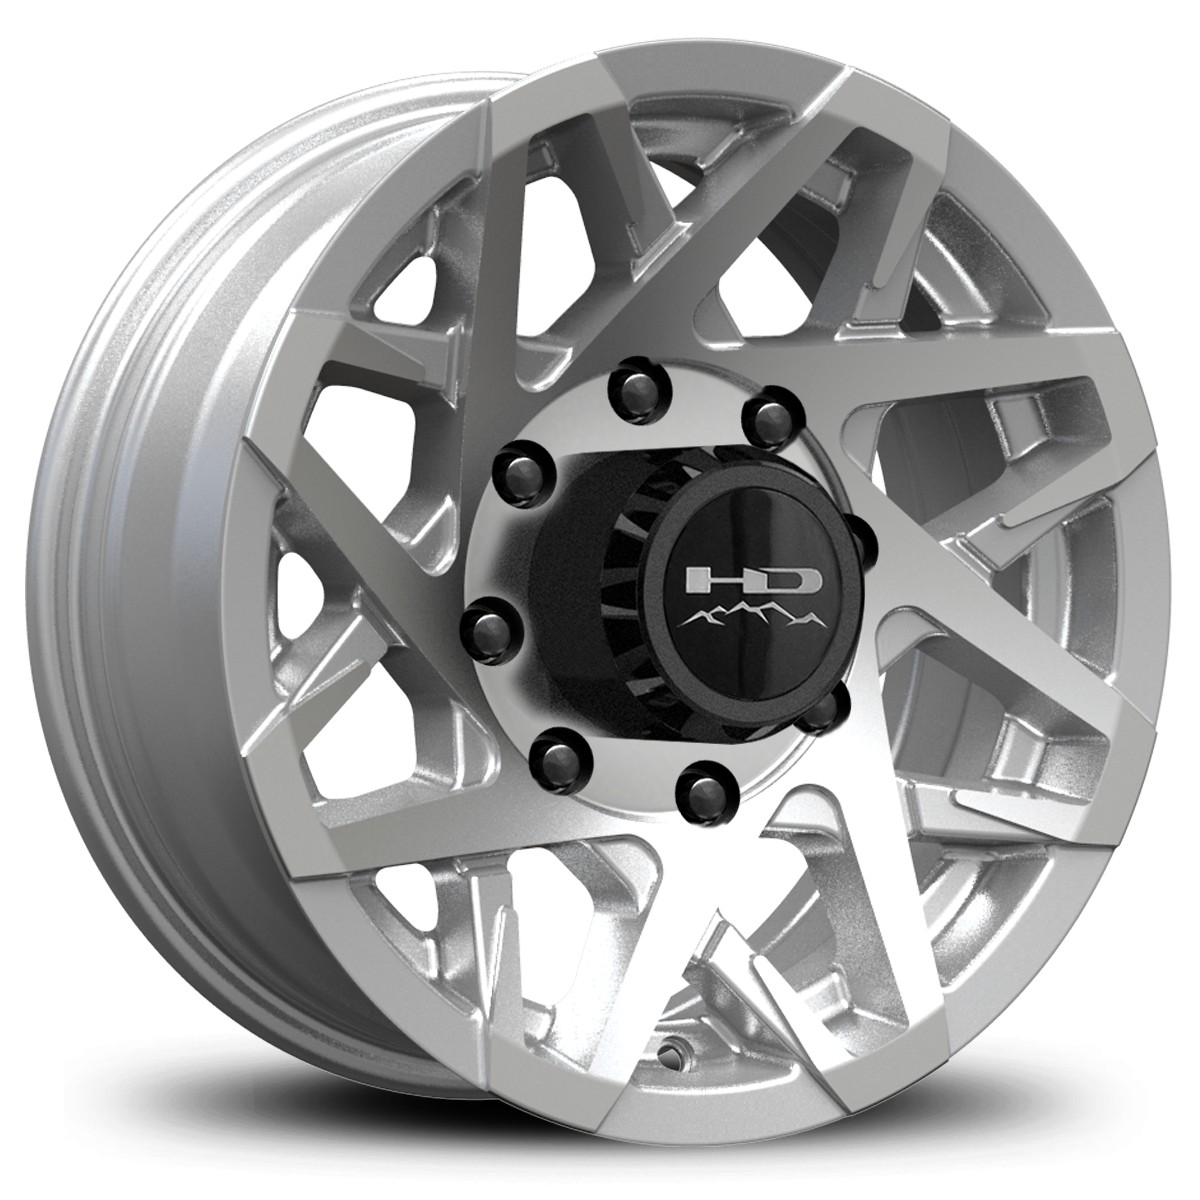 HD Off-Road Canyon Custom Trailer Wheel Rims in 16x6.0 16x6 Gloss Black Machined Face with Center Cap & Logo fits 8x6.50 / 8x165 Axle Boat, Car, RV, Travel, Concession, Horse, Utility, Lawn & Garden, & Landscaping.